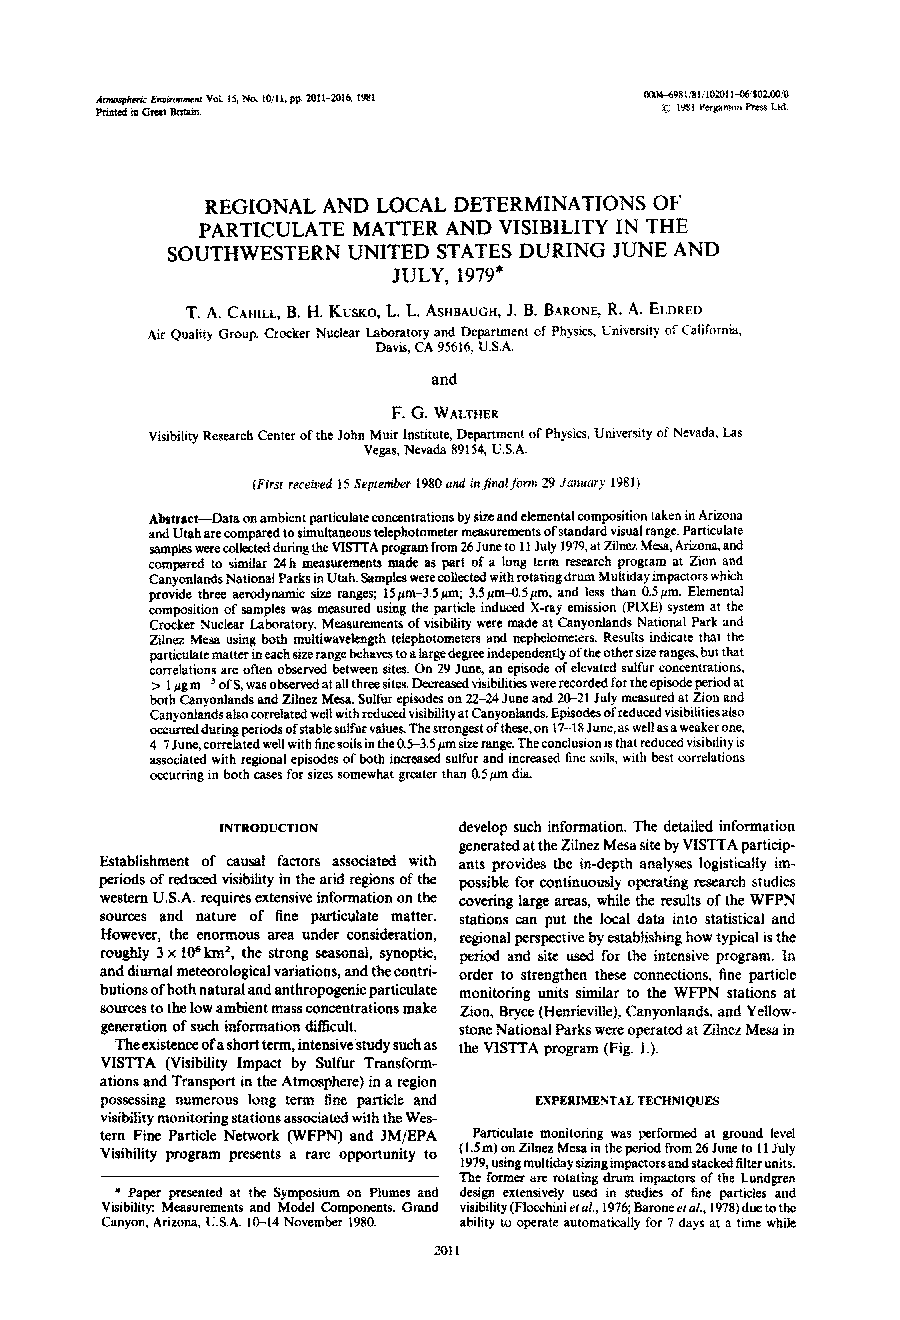 Regional and local determinations of particulate matter and visibility in the southwestern United States during June and July, 1979